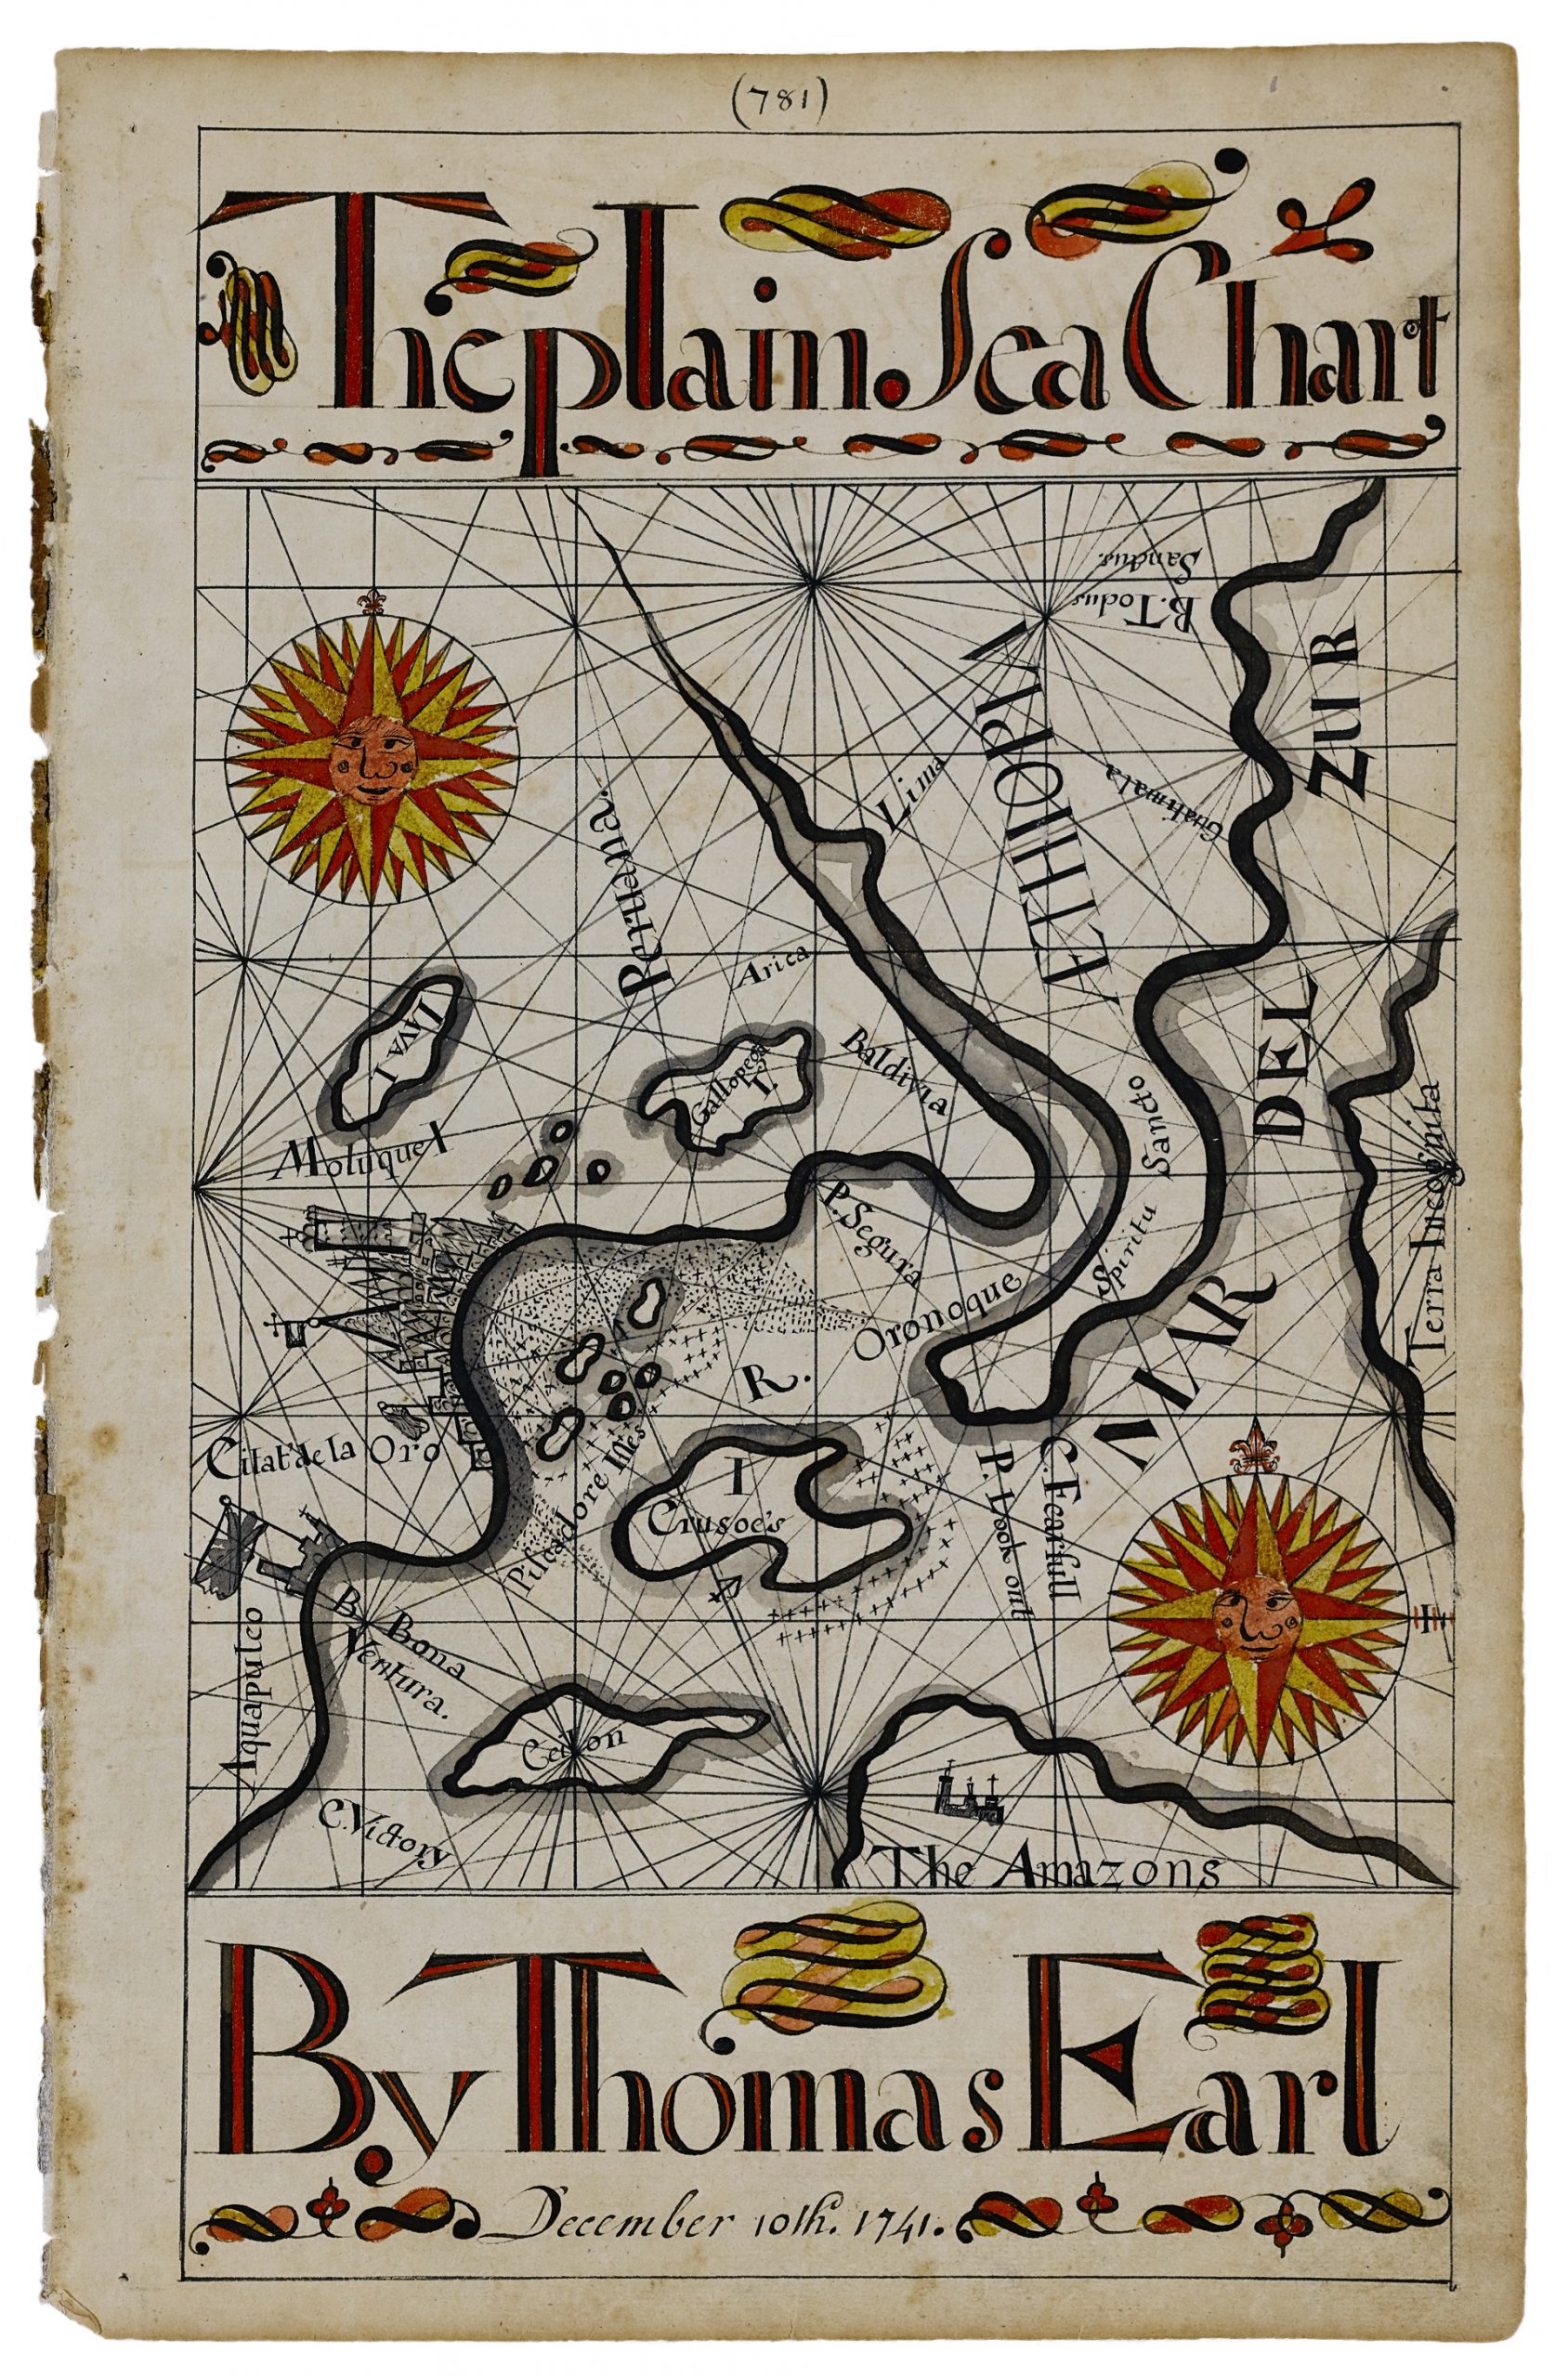 Thomas Earl, The Plain Sea Chart, from his 1740/41 copybook, page 781.